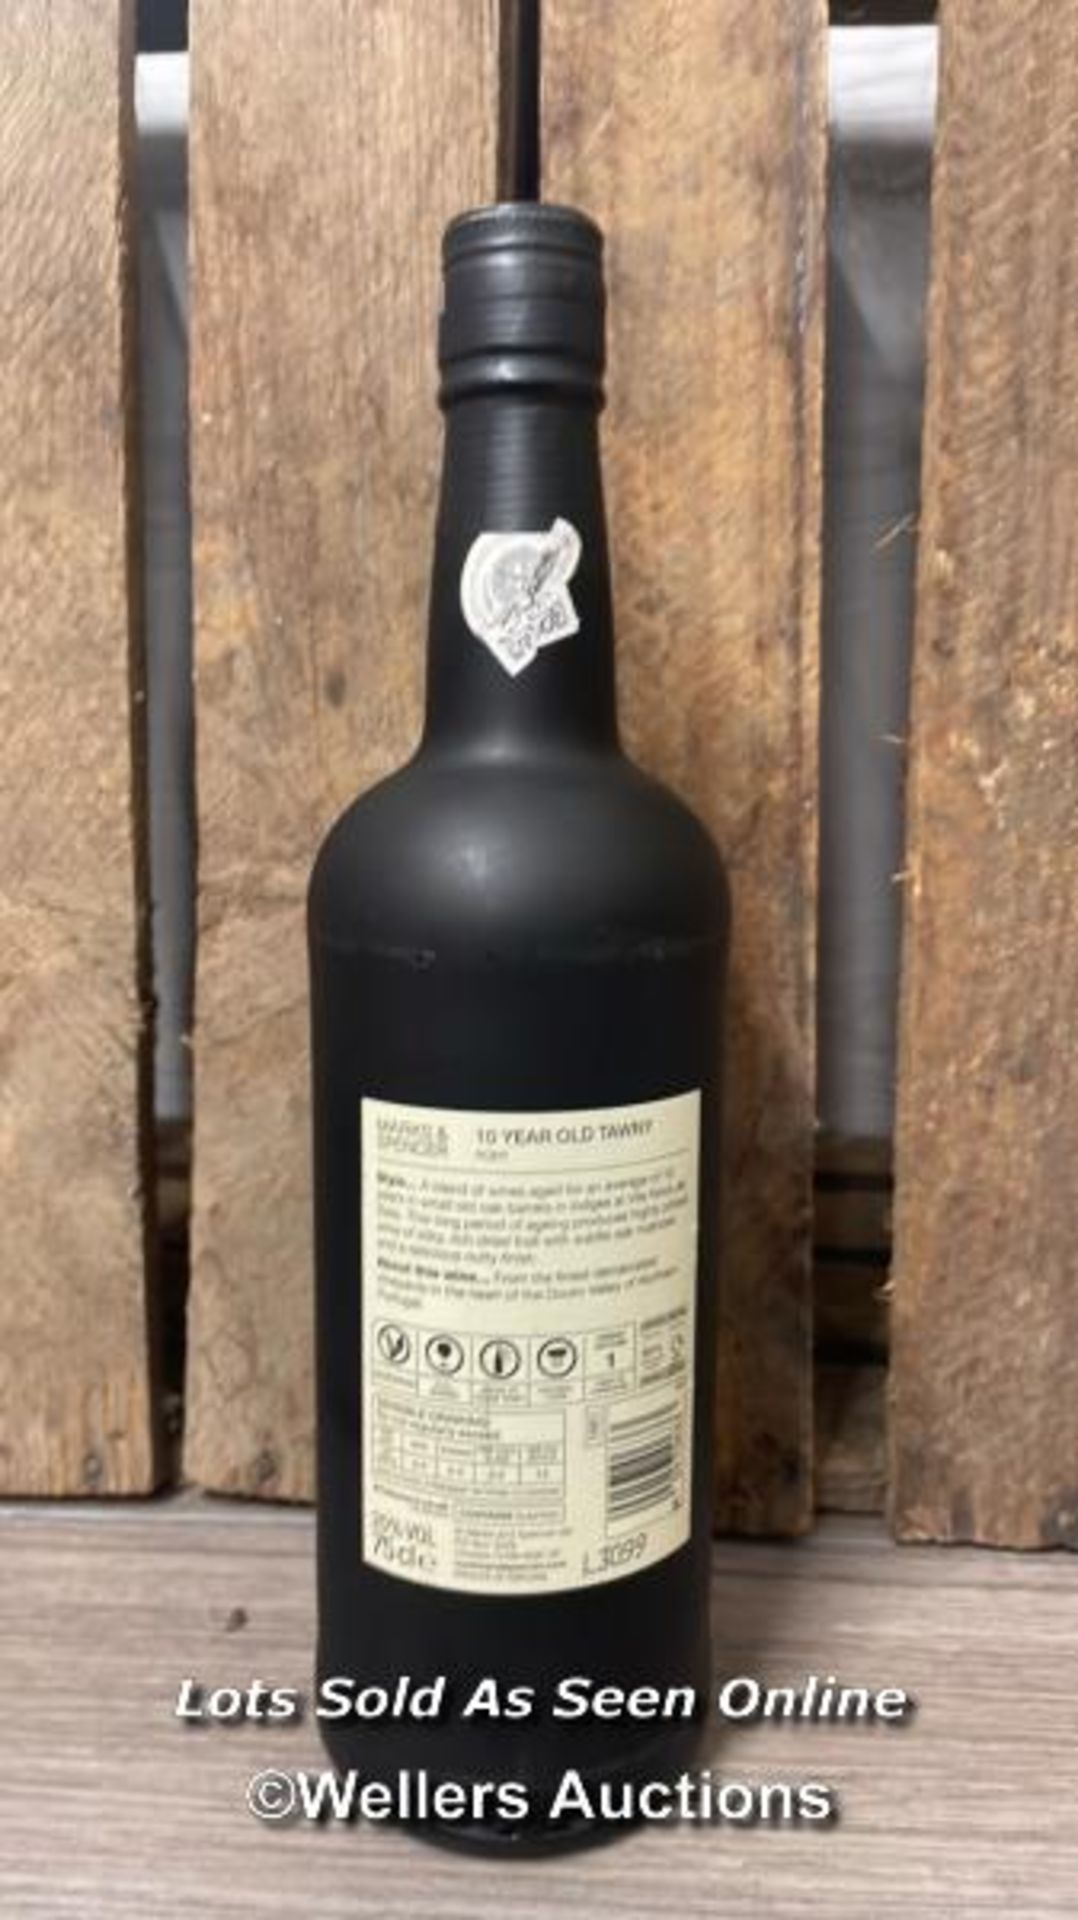 M&S AGED TAWNY PORT, 10 YEARS, BOTTLED IN 2013, 20% VOL, 75CL - Image 4 of 4